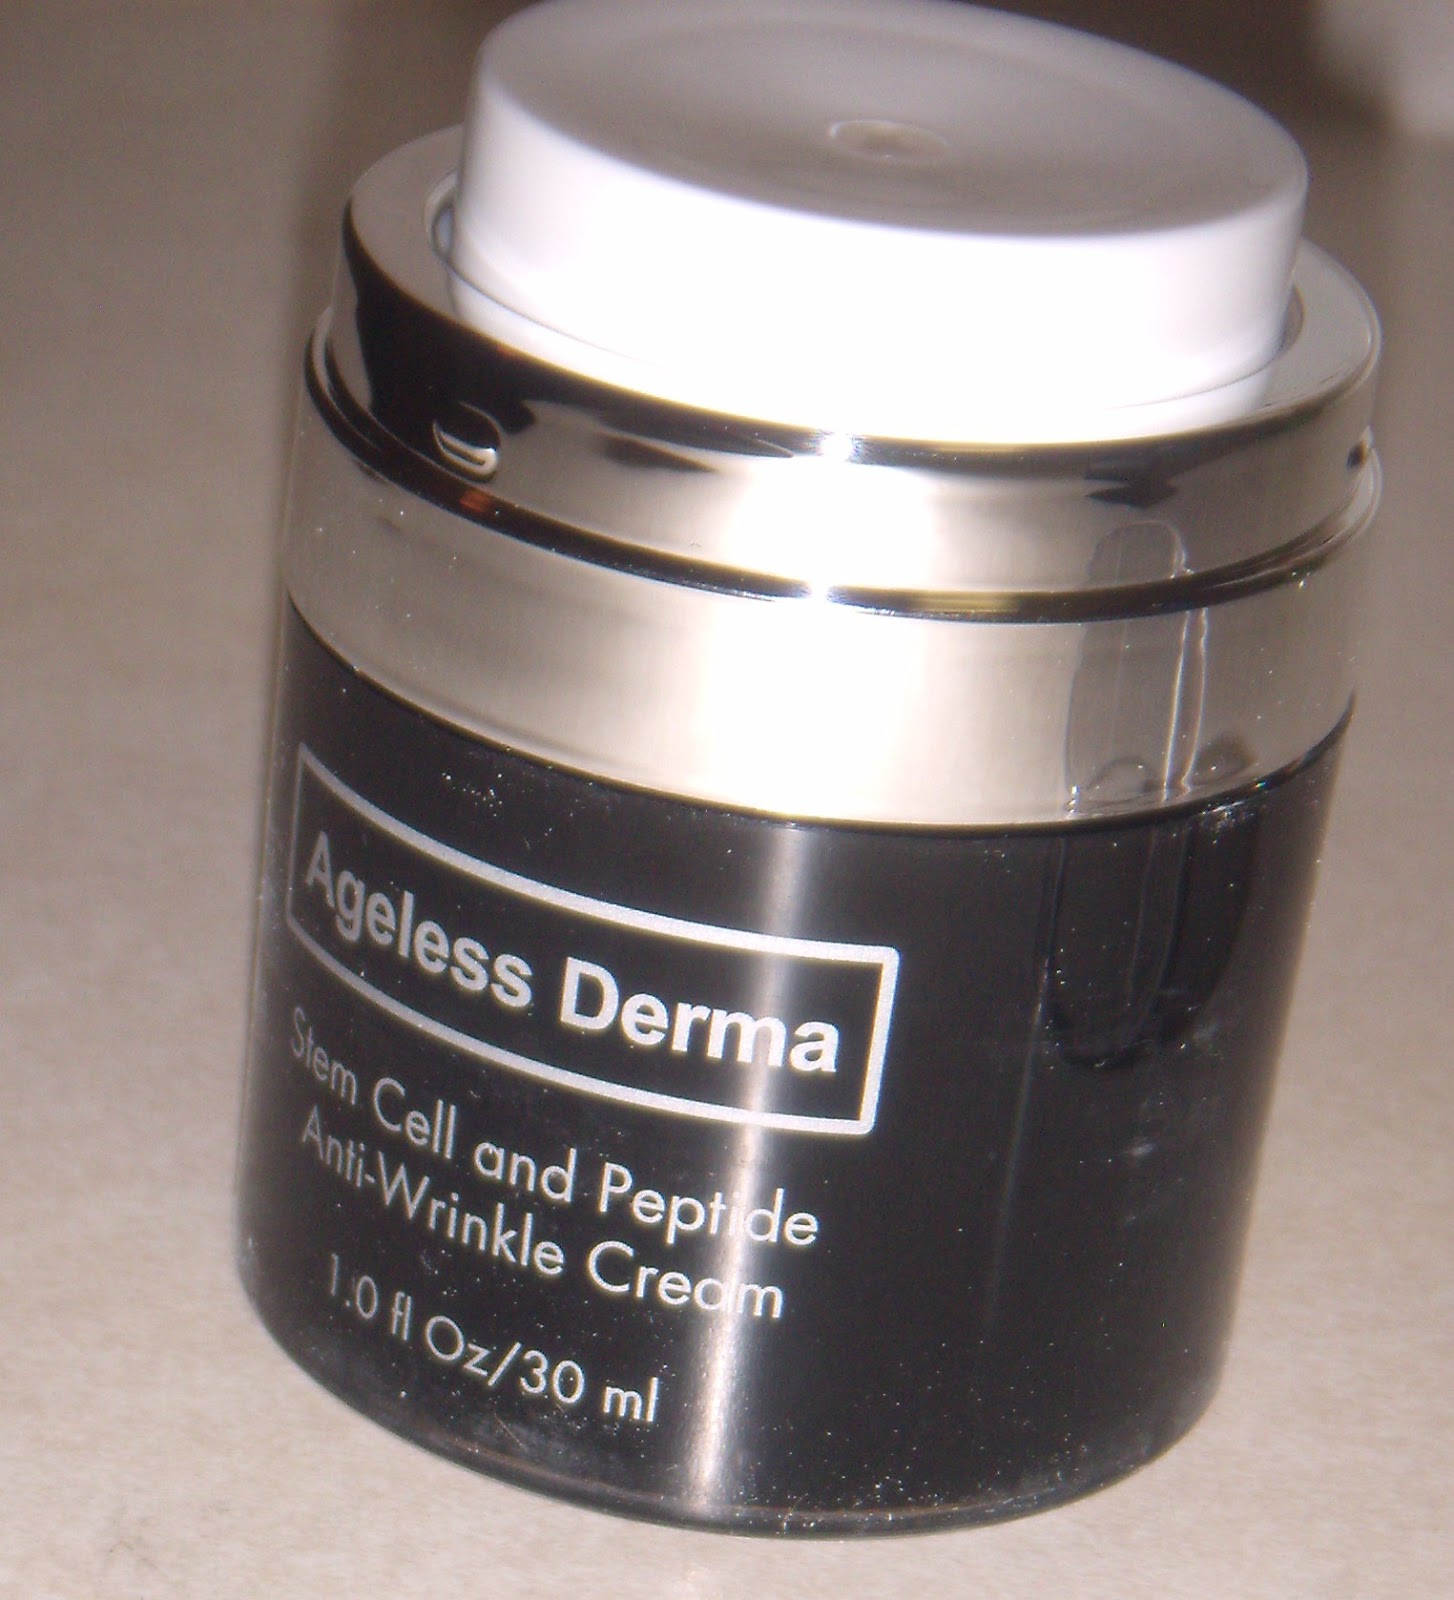 Mommie of 2: Ageless Derma Anti Wrinkle Cream Review